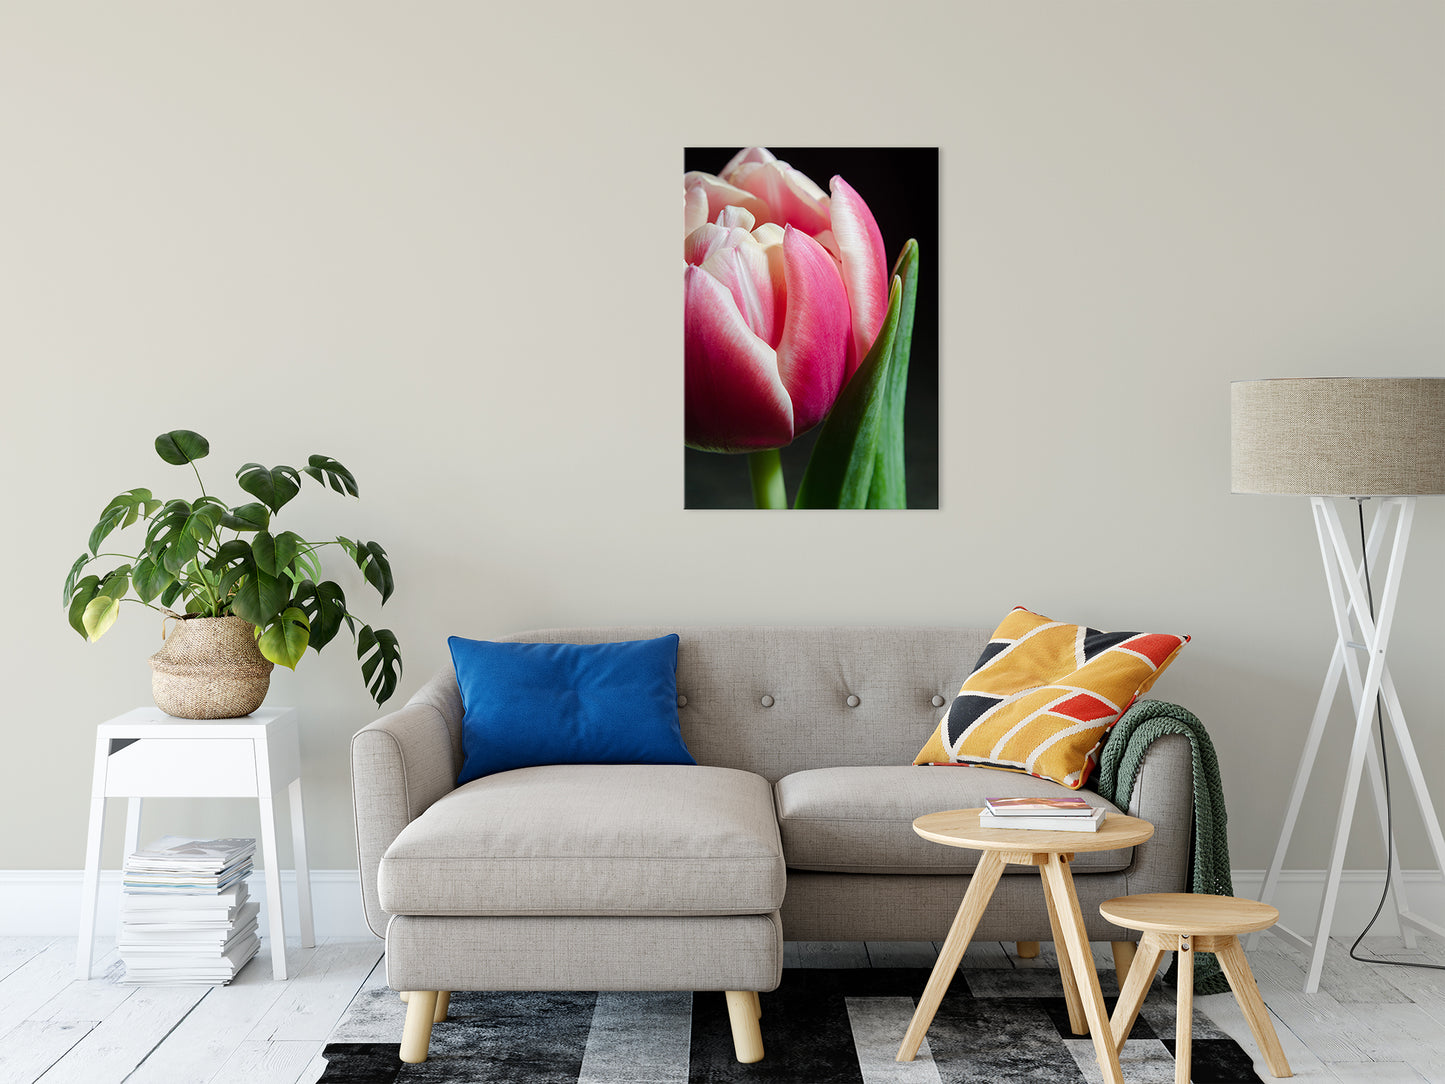 Pink and White Tulip Nature / Floral Photo Fine Art Canvas Wall Art Prints 24" x 36" - PIPAFINEART